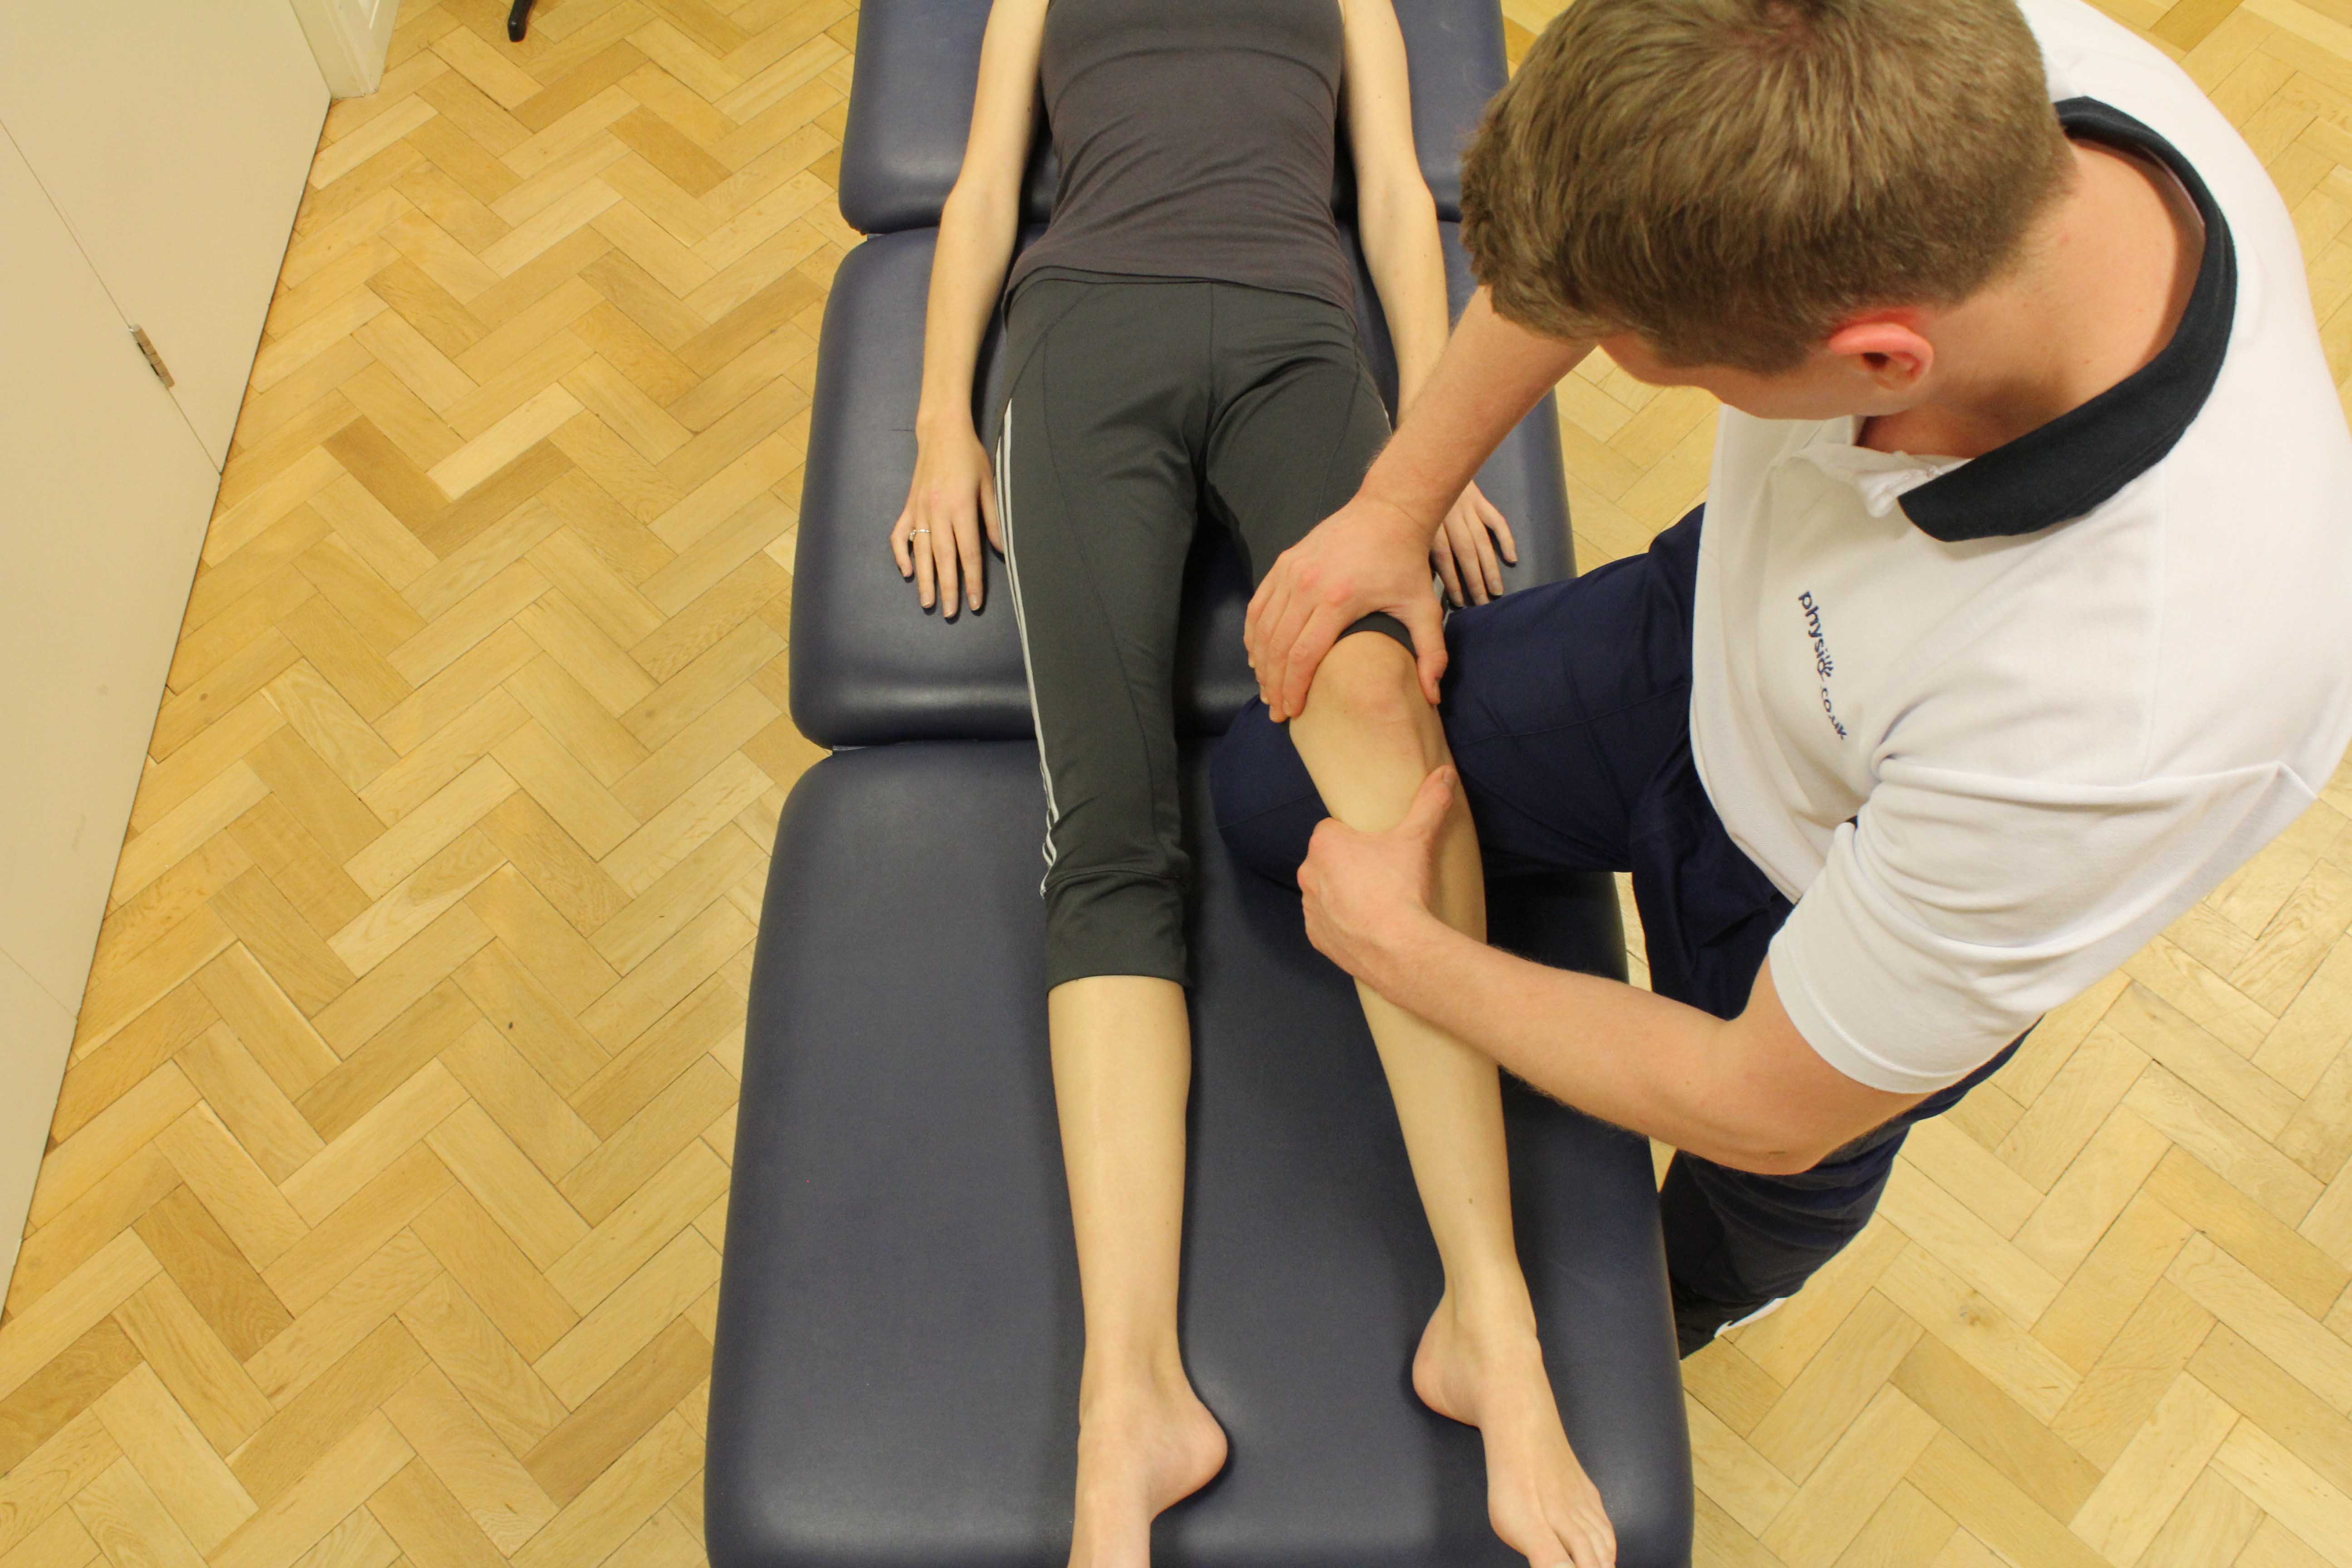 Therapist performing knee assessment